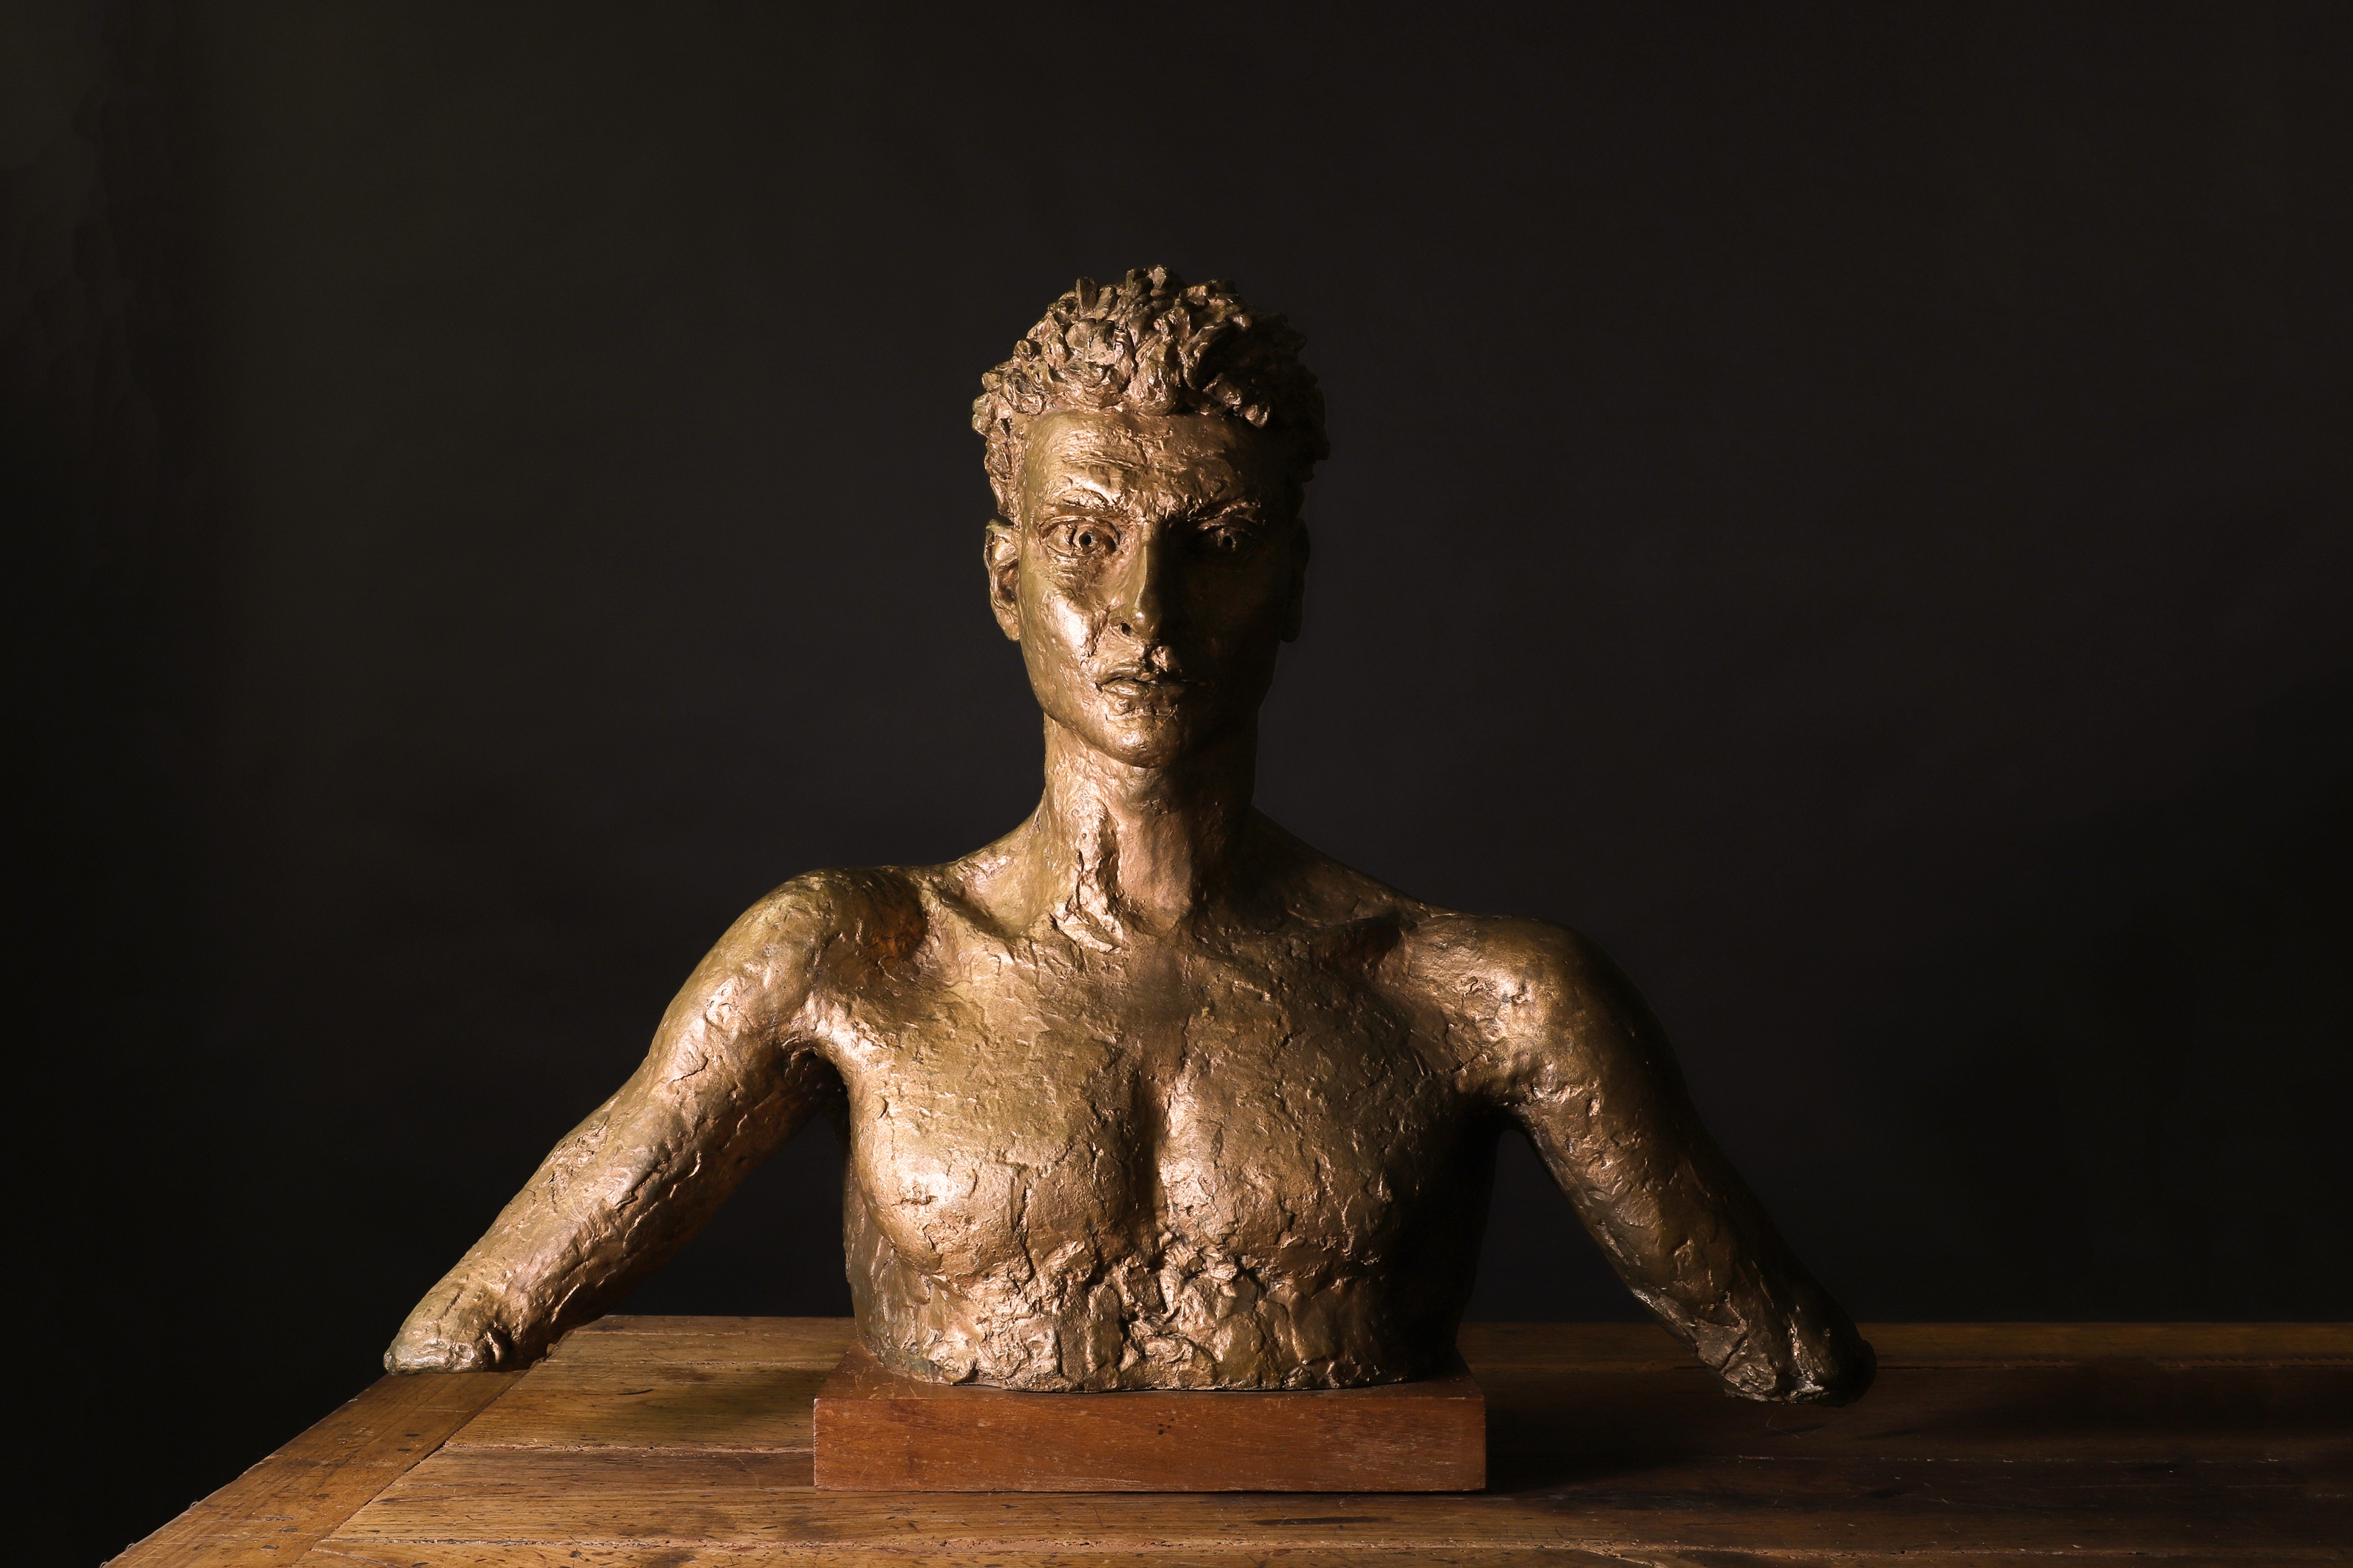    Sir Jacob Epstein (1880-1959) Lucian Freud bronze with a light brown-gold patina, conceived in 1947 84cm wide 28cm deep 63cm high, on a wooden base 68cm high overall (£50,000-70,000)